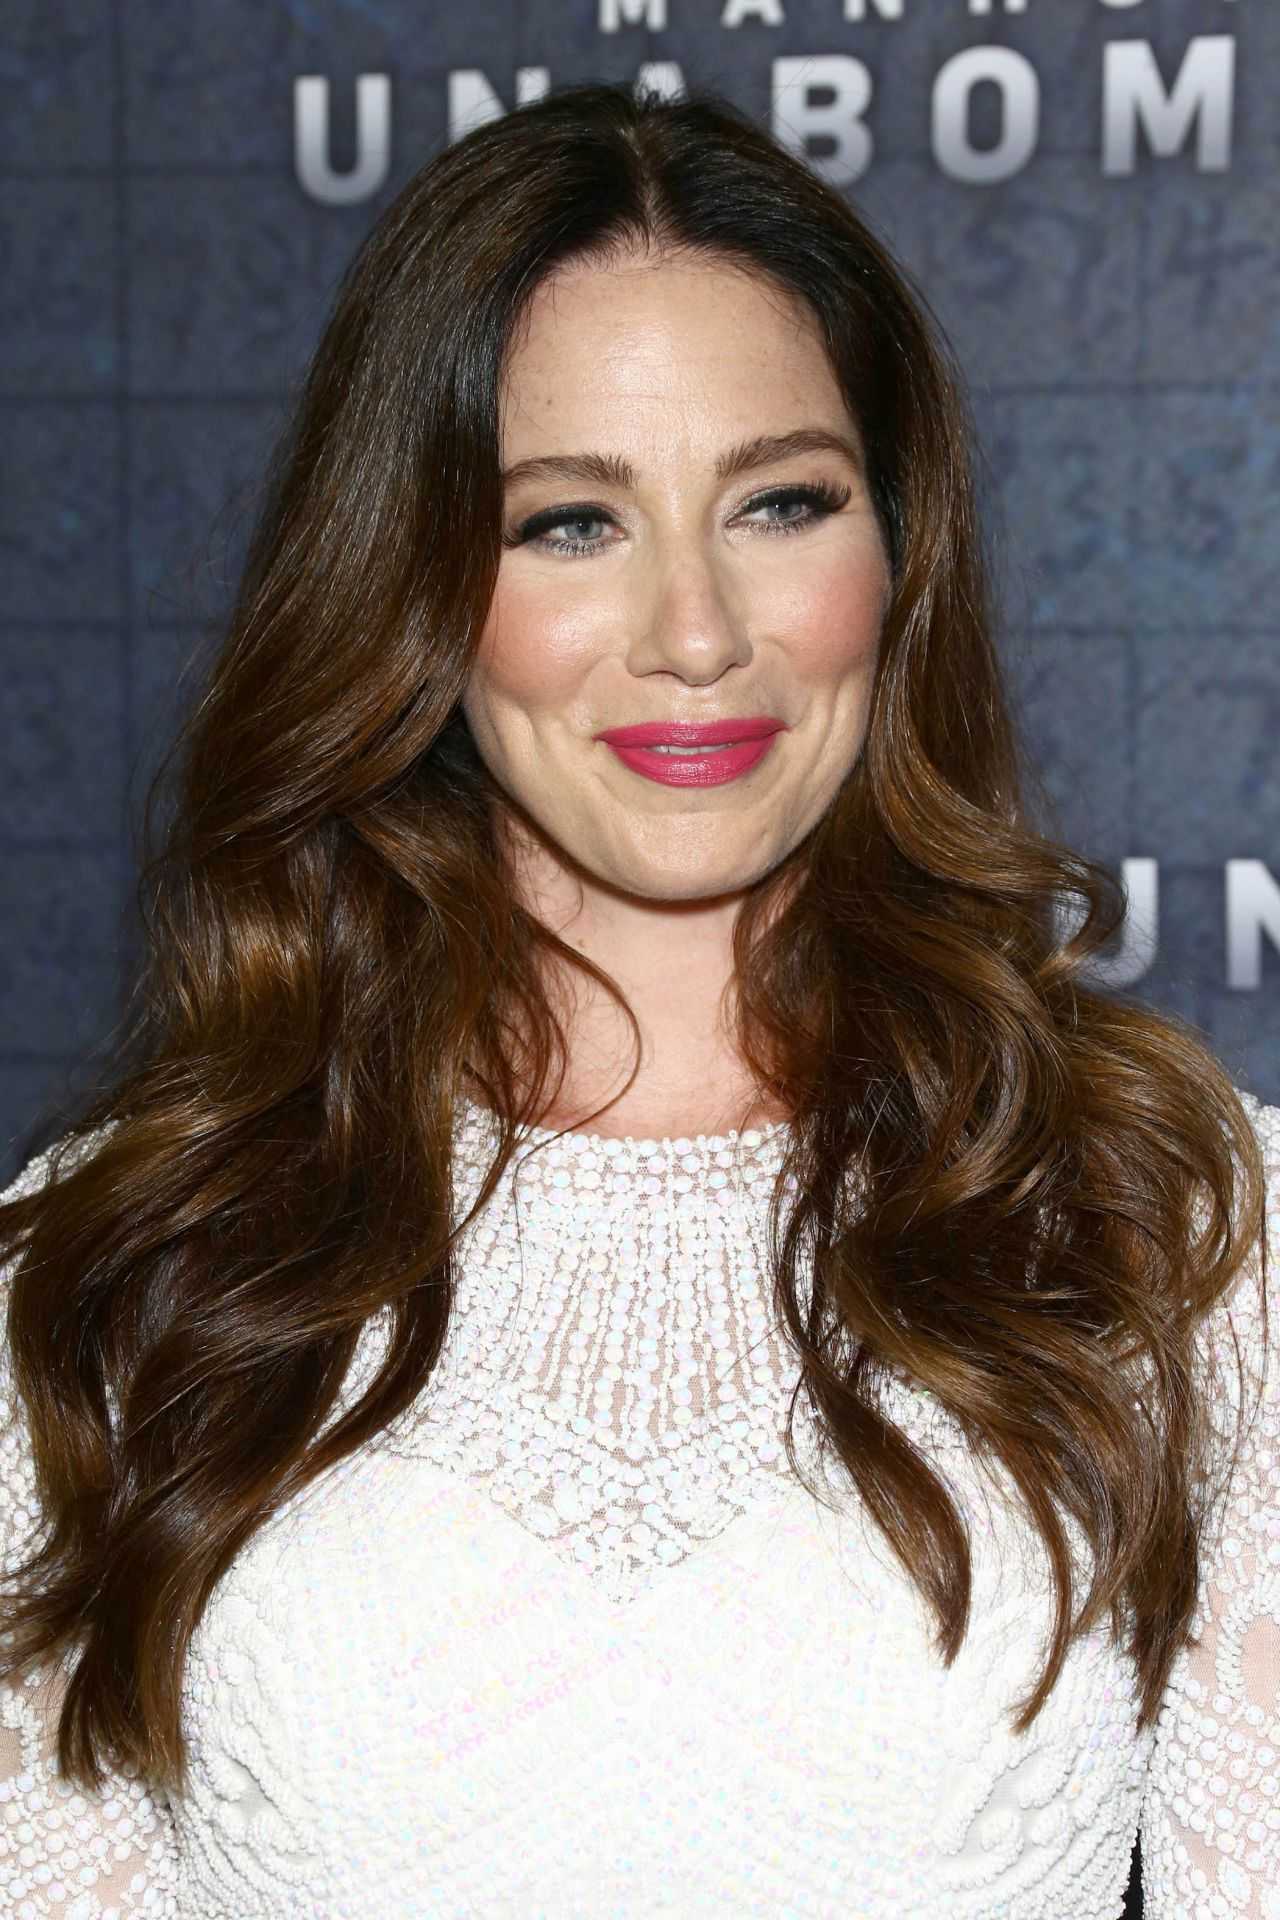 70+ Hot Pictures Of Lynn Collins Expose Her Smokin Hot Body 428